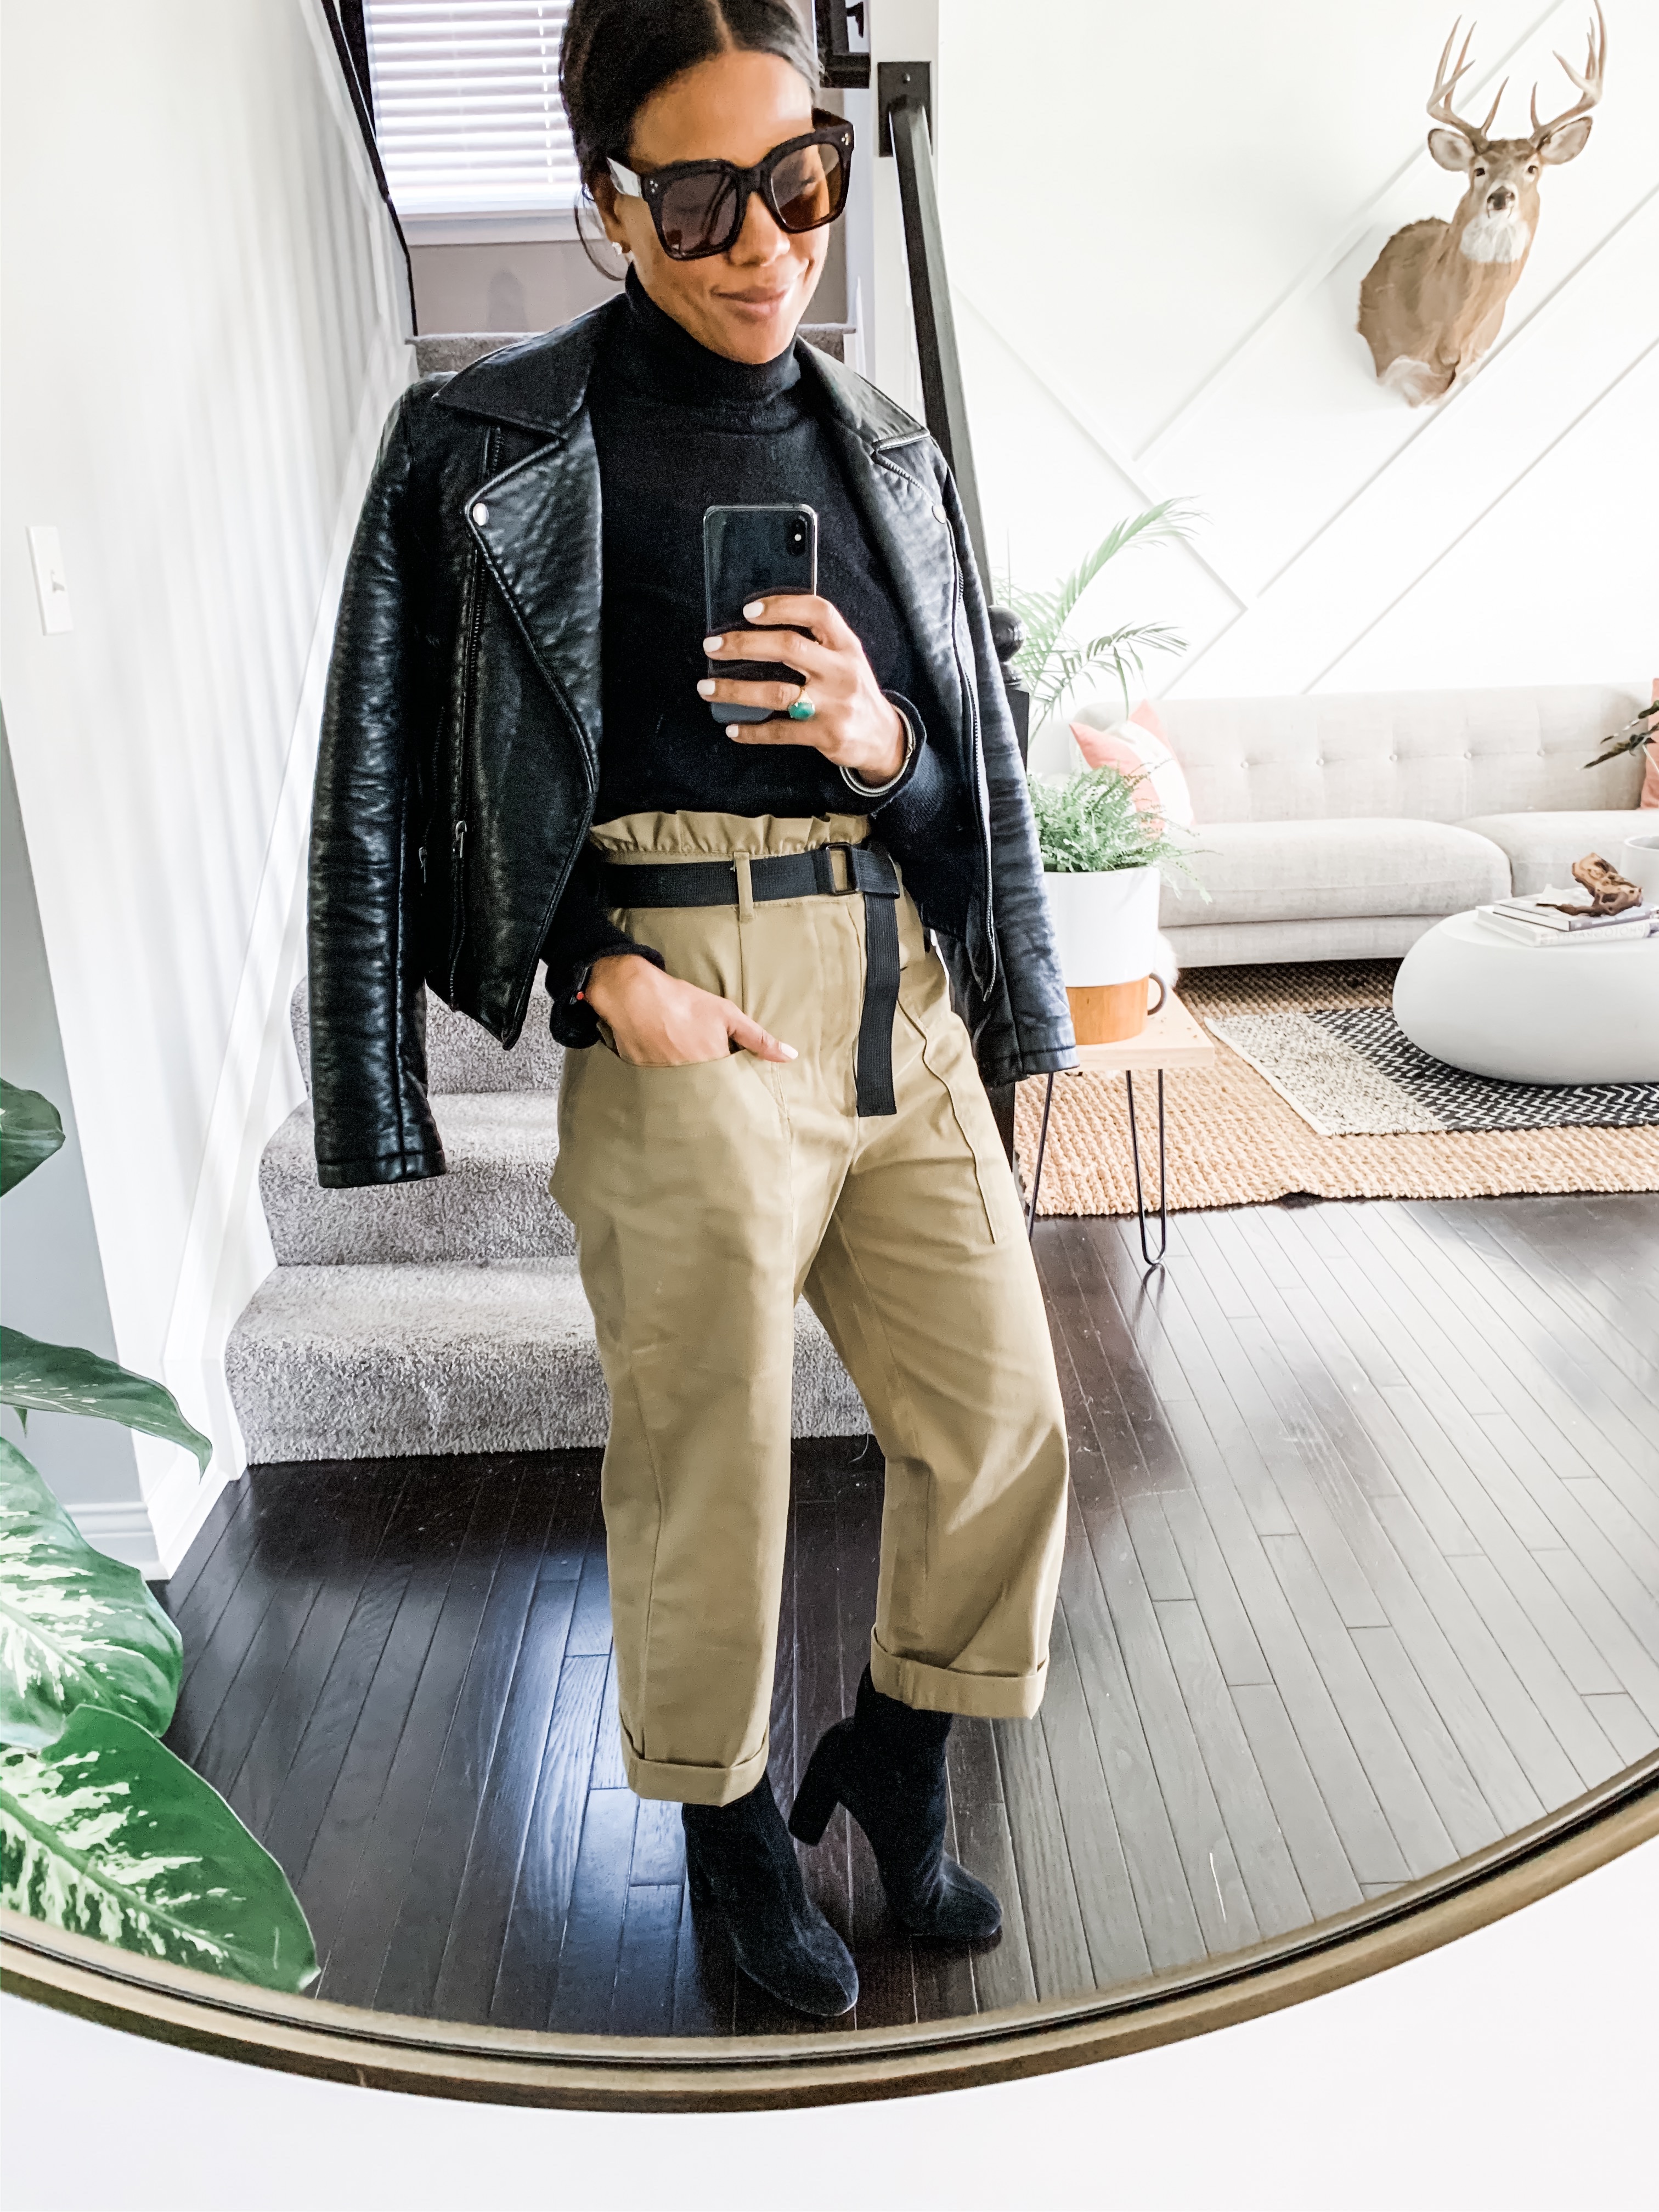 Styling High Waist Pants for Fall